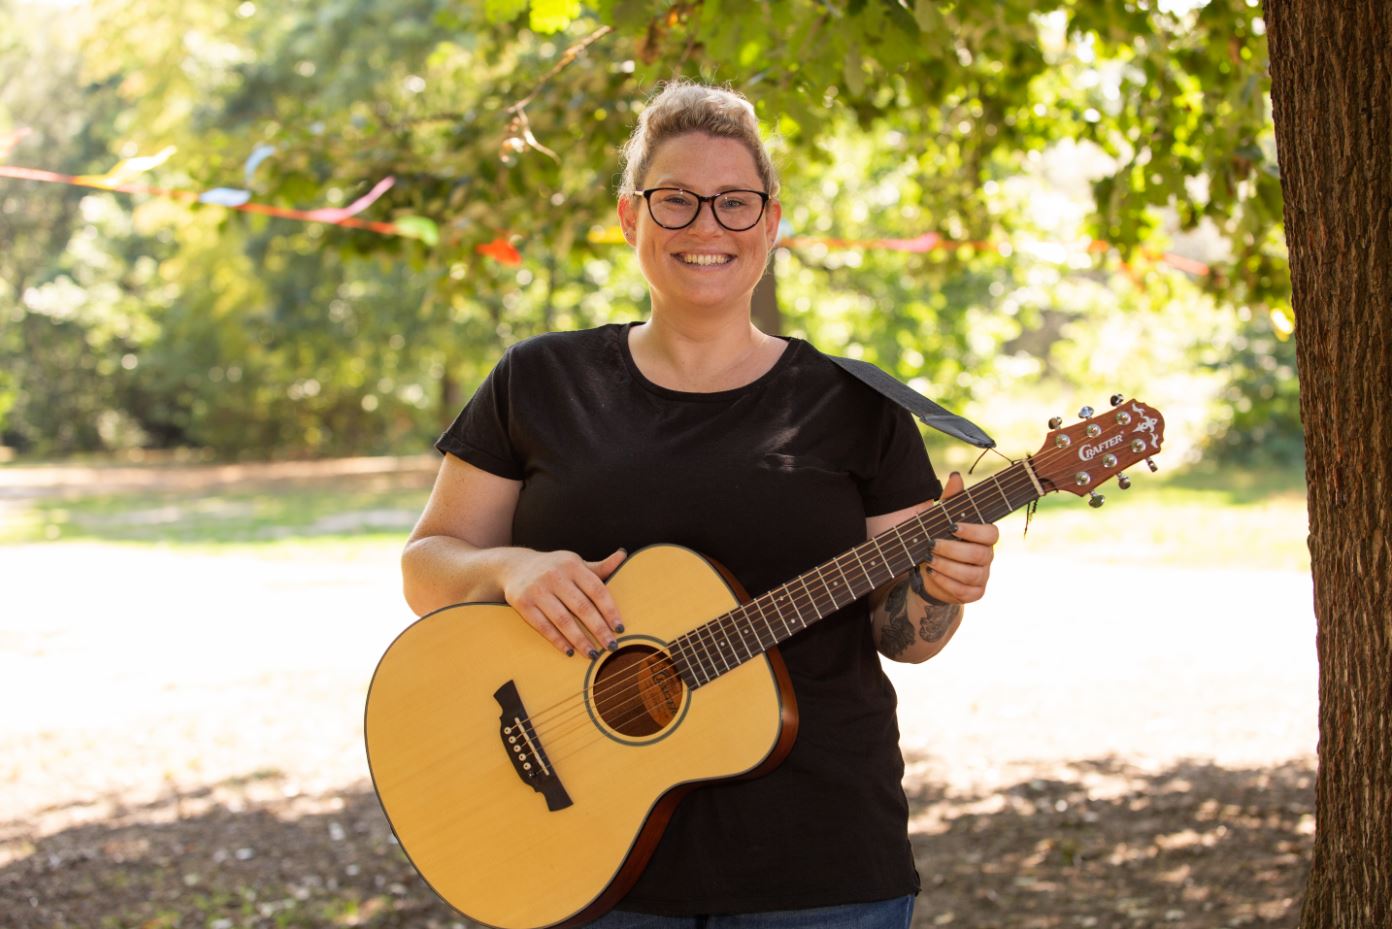 Emily stood with a guitar in a leafy park on a sunny day, wearing a black t-shirt, glasses and her blonde hair tied back